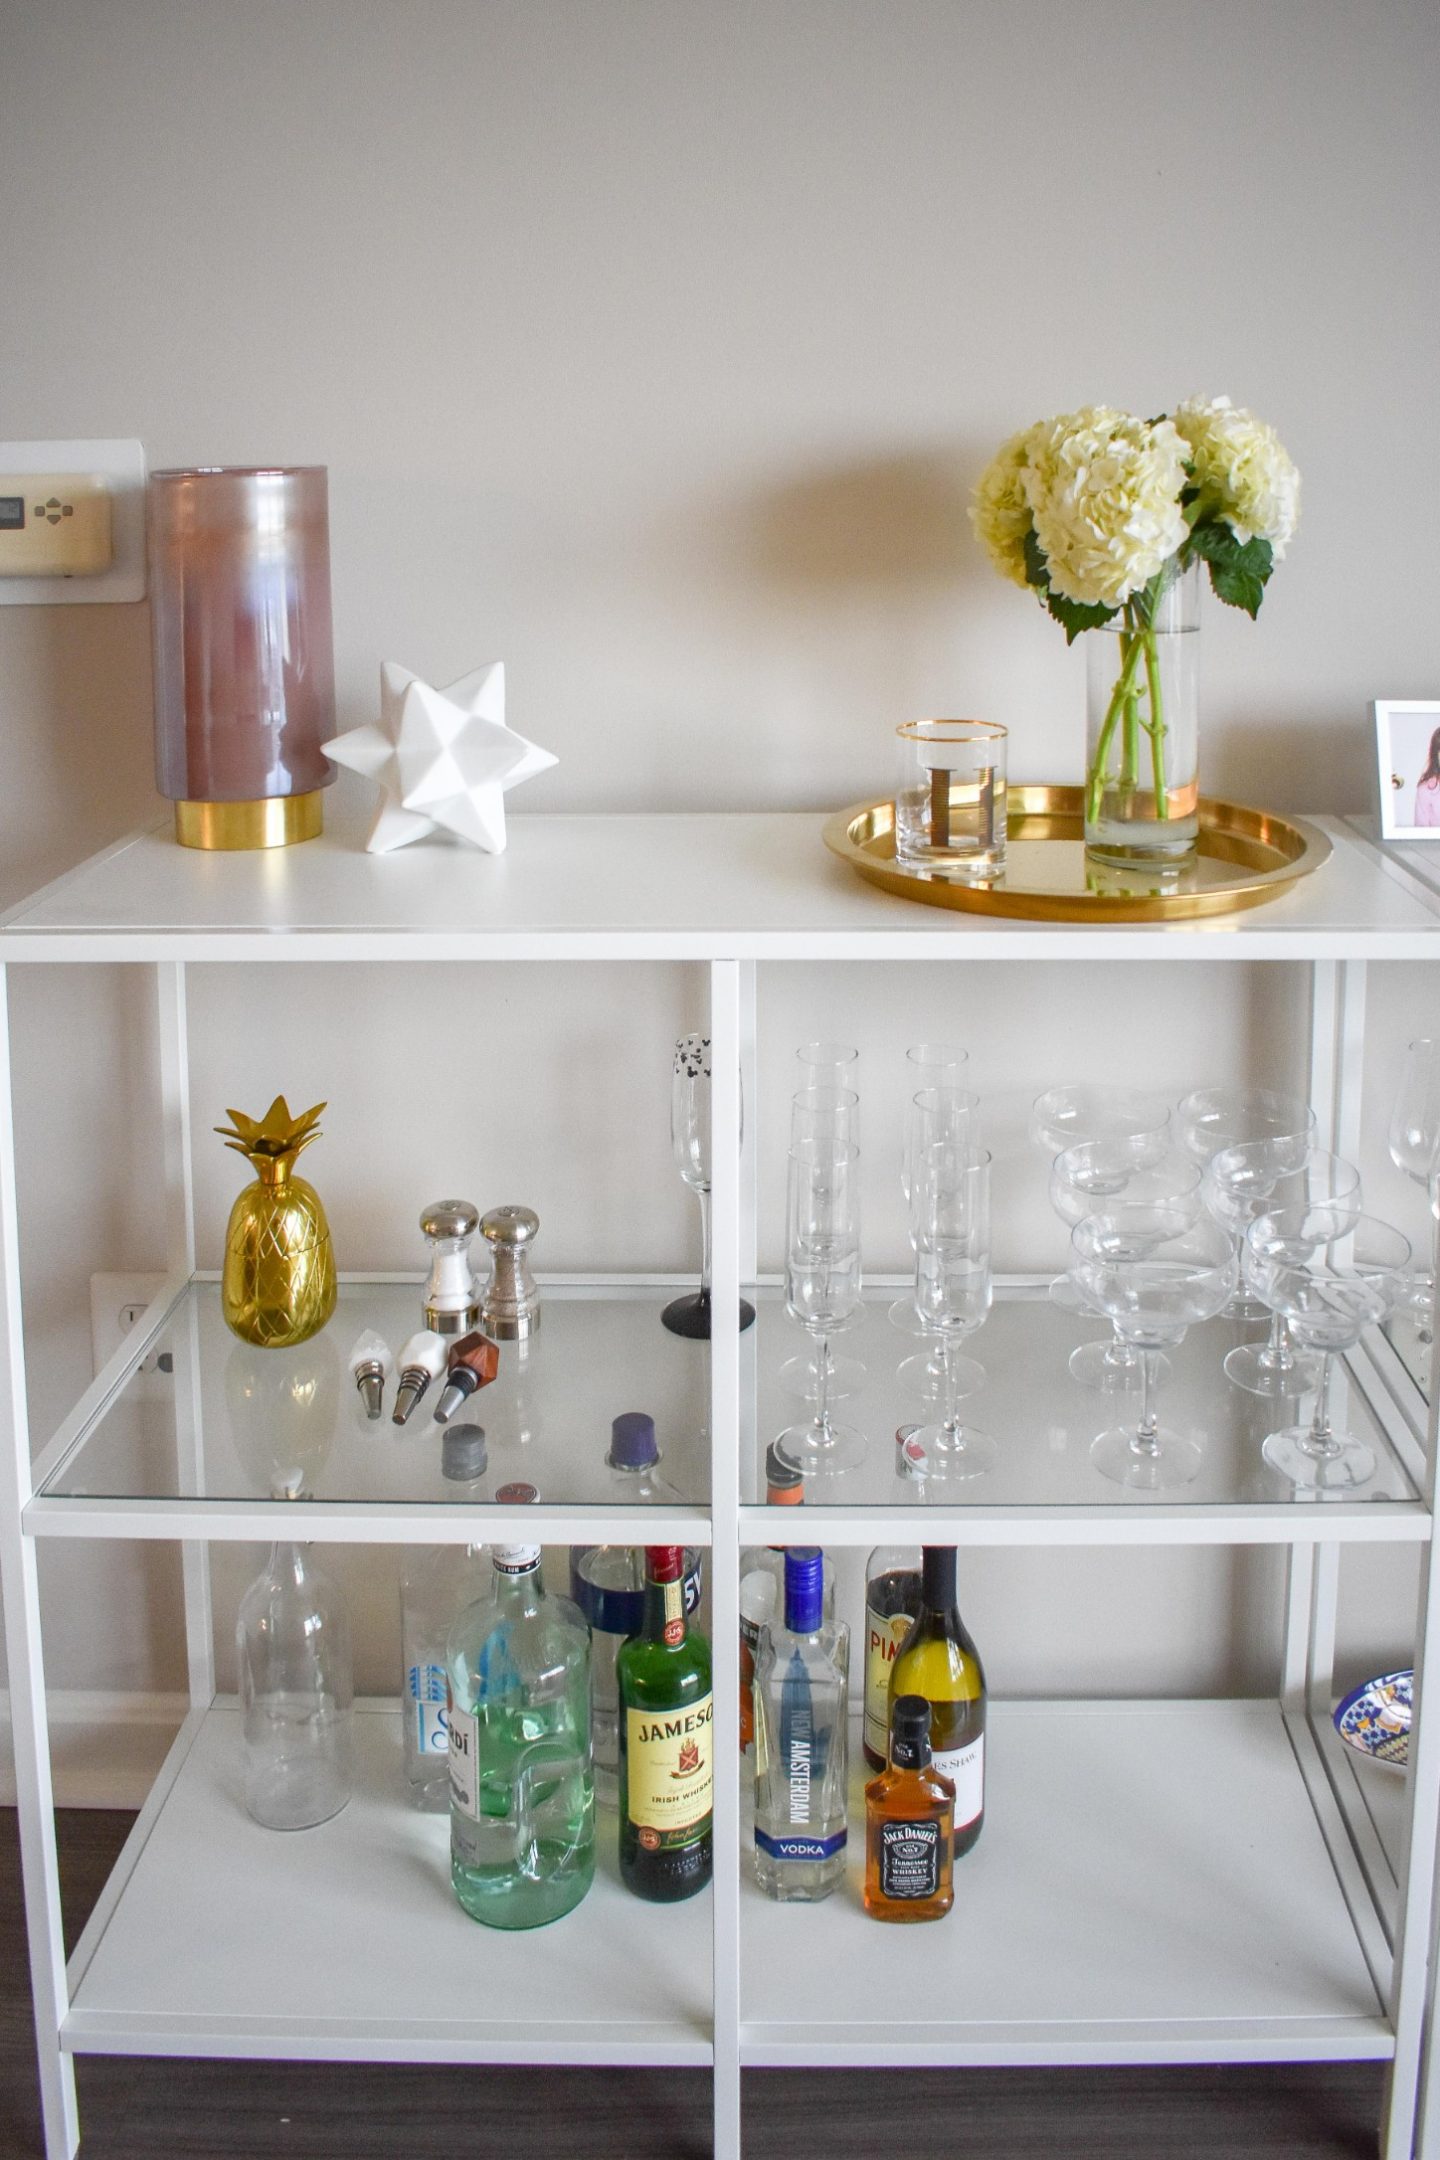 I'm showing off my IKEA bar cart (which are bar shelves, let's be honest) and how I decorated them with all the cute glassware and trinkets!